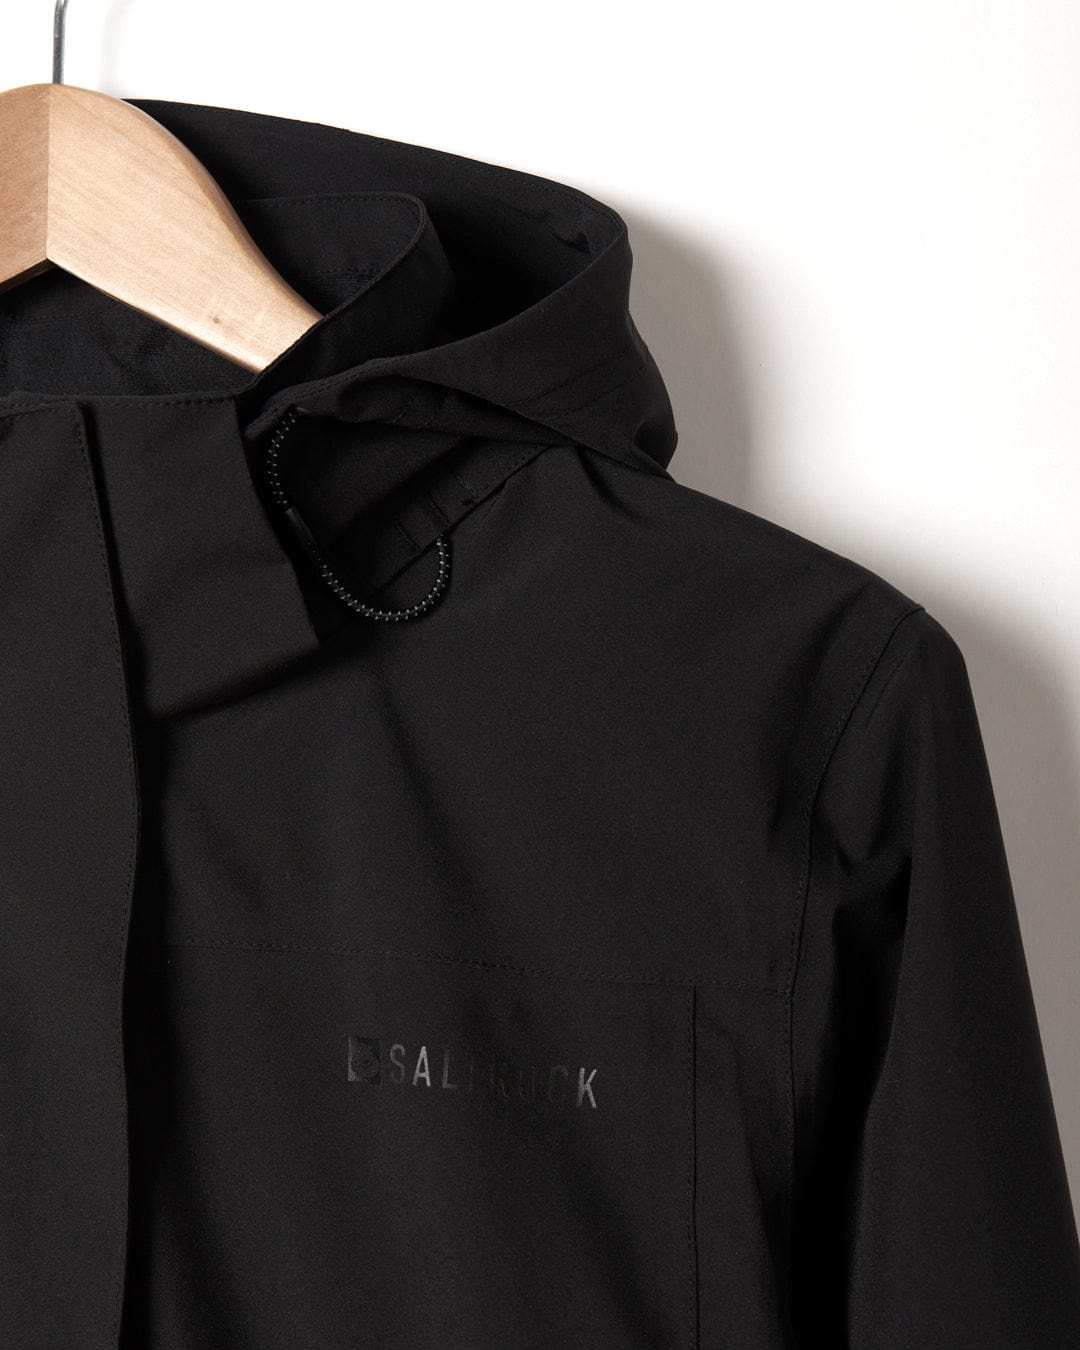 Close-up of a Saltrock Aubrey - Womens Waterproof Jacket - Black on a wooden hanger, displaying the brand logo "Saltrock" subtly embossed on the fabric.